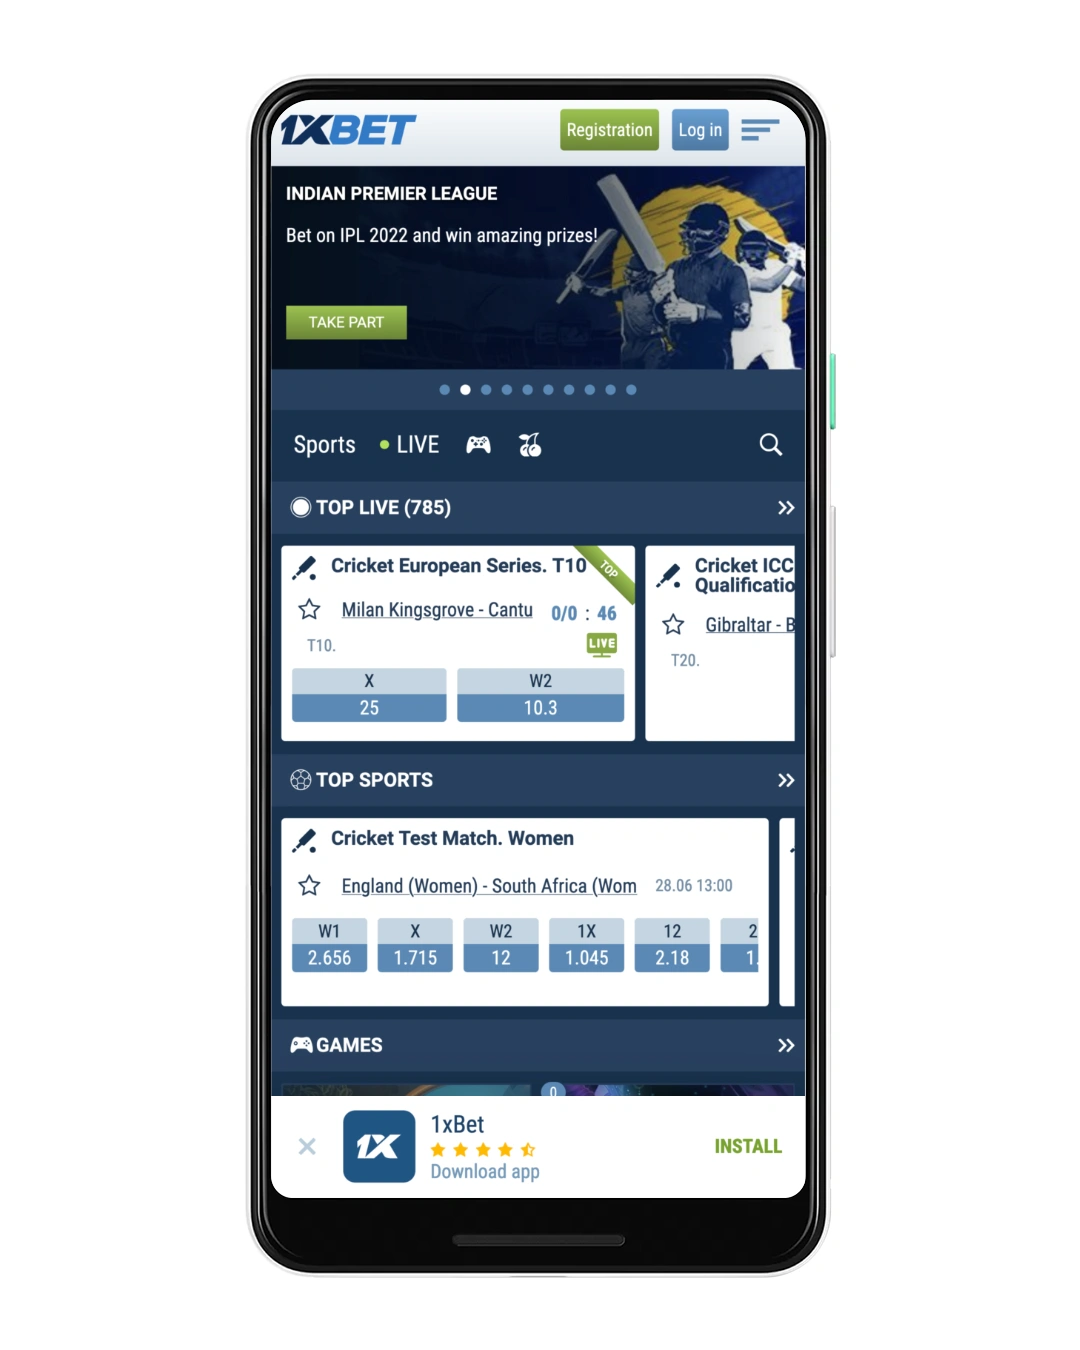 1xBet mobile application for Android devices